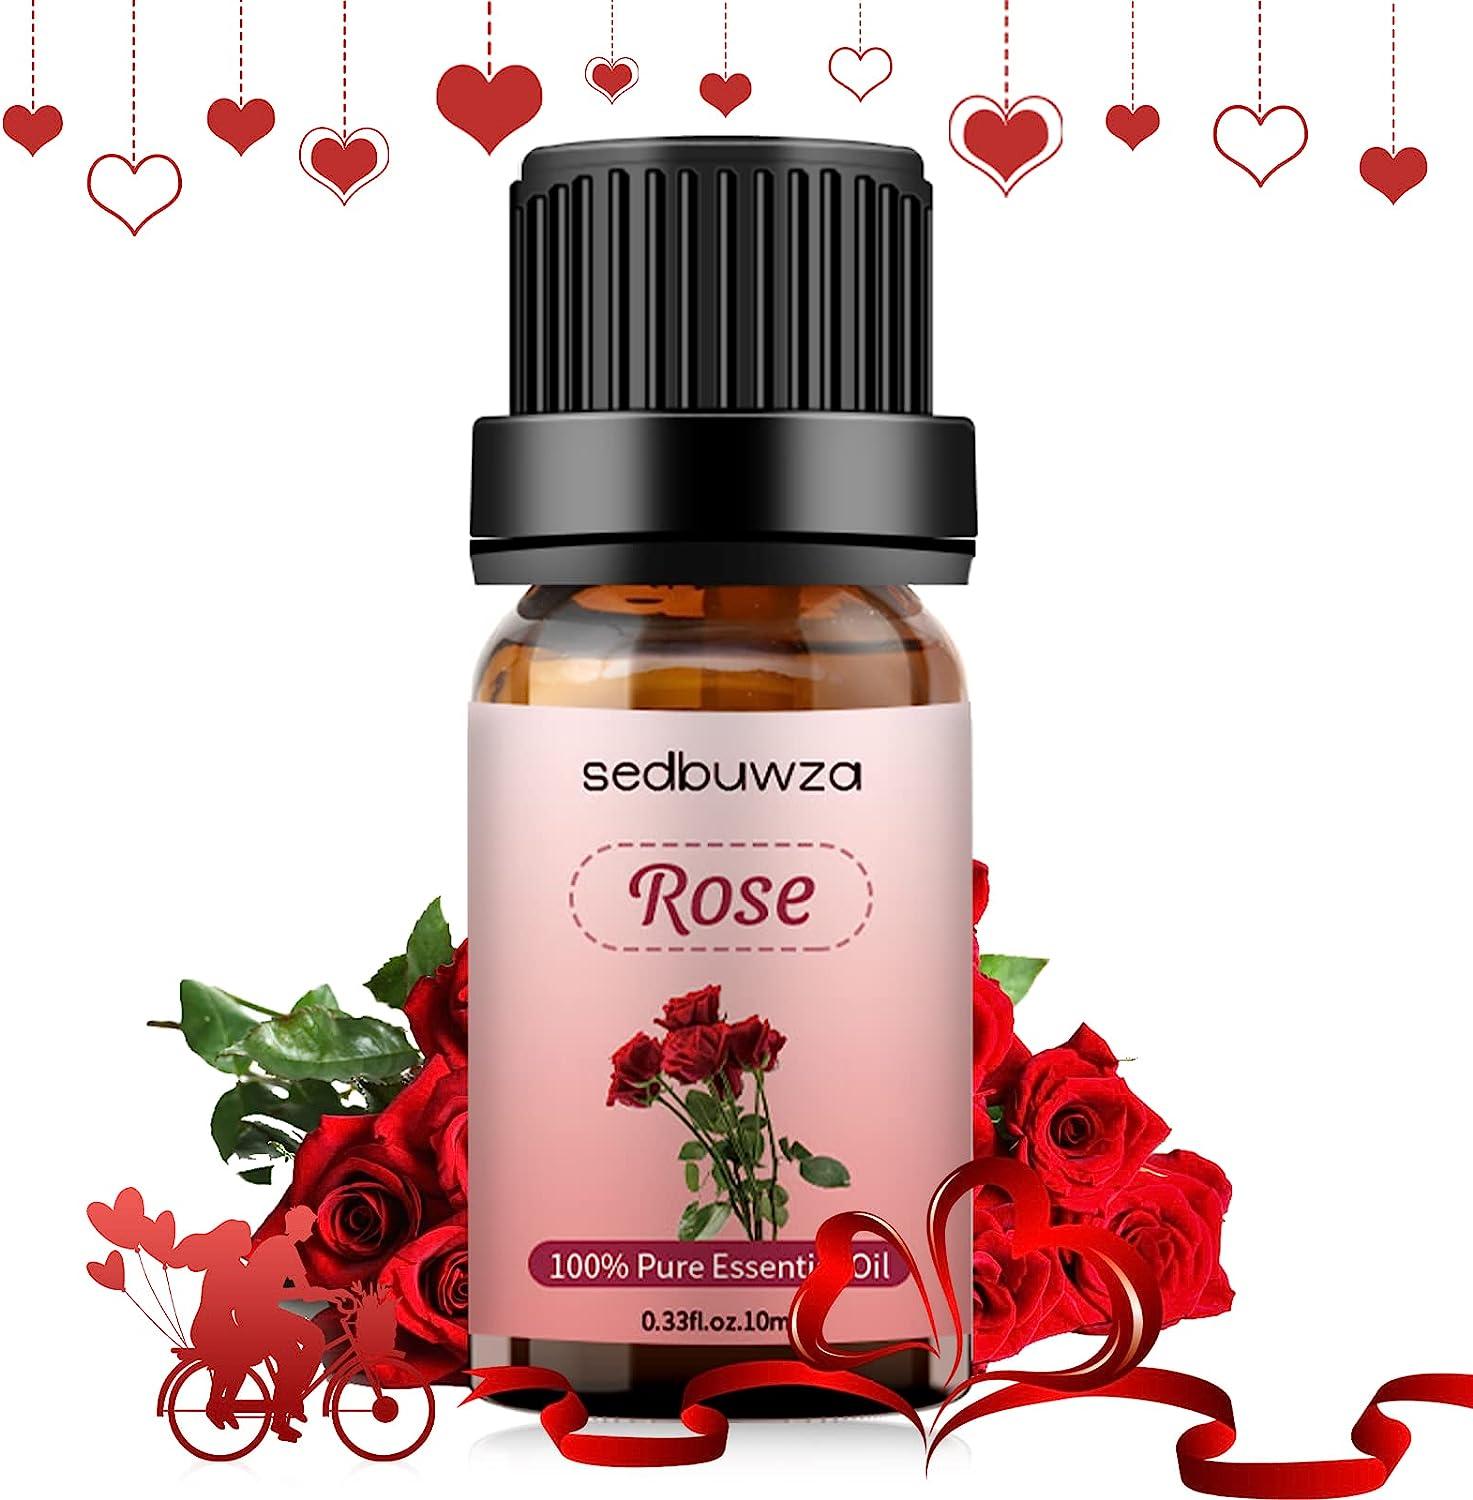  Sedbuwza Cherry Blossom Essential Oil, 3.38 Fl Oz Cherry  Blossom Oil 100% Pure Natural Cherry Blossom Fragrance Oil for Massage  Diffuser Humidifier Candle Soap Aromatherapy Making : Health & Household